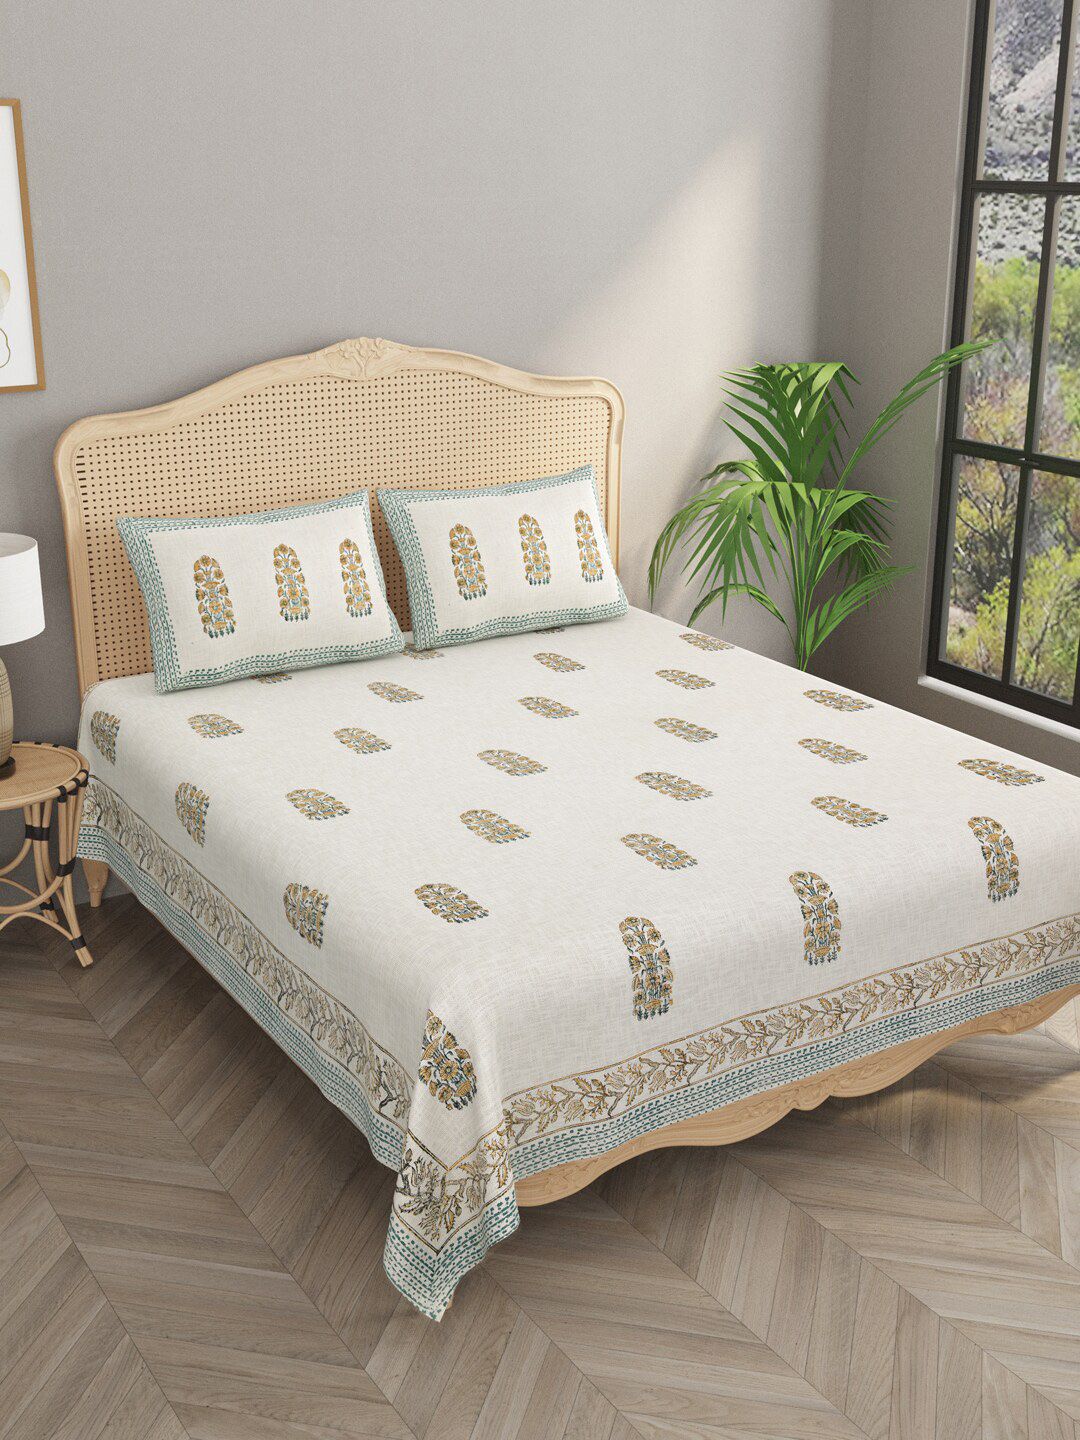 Gulaab Jaipur Floral Printed Egyptian Cotton Bed Covers Price in India